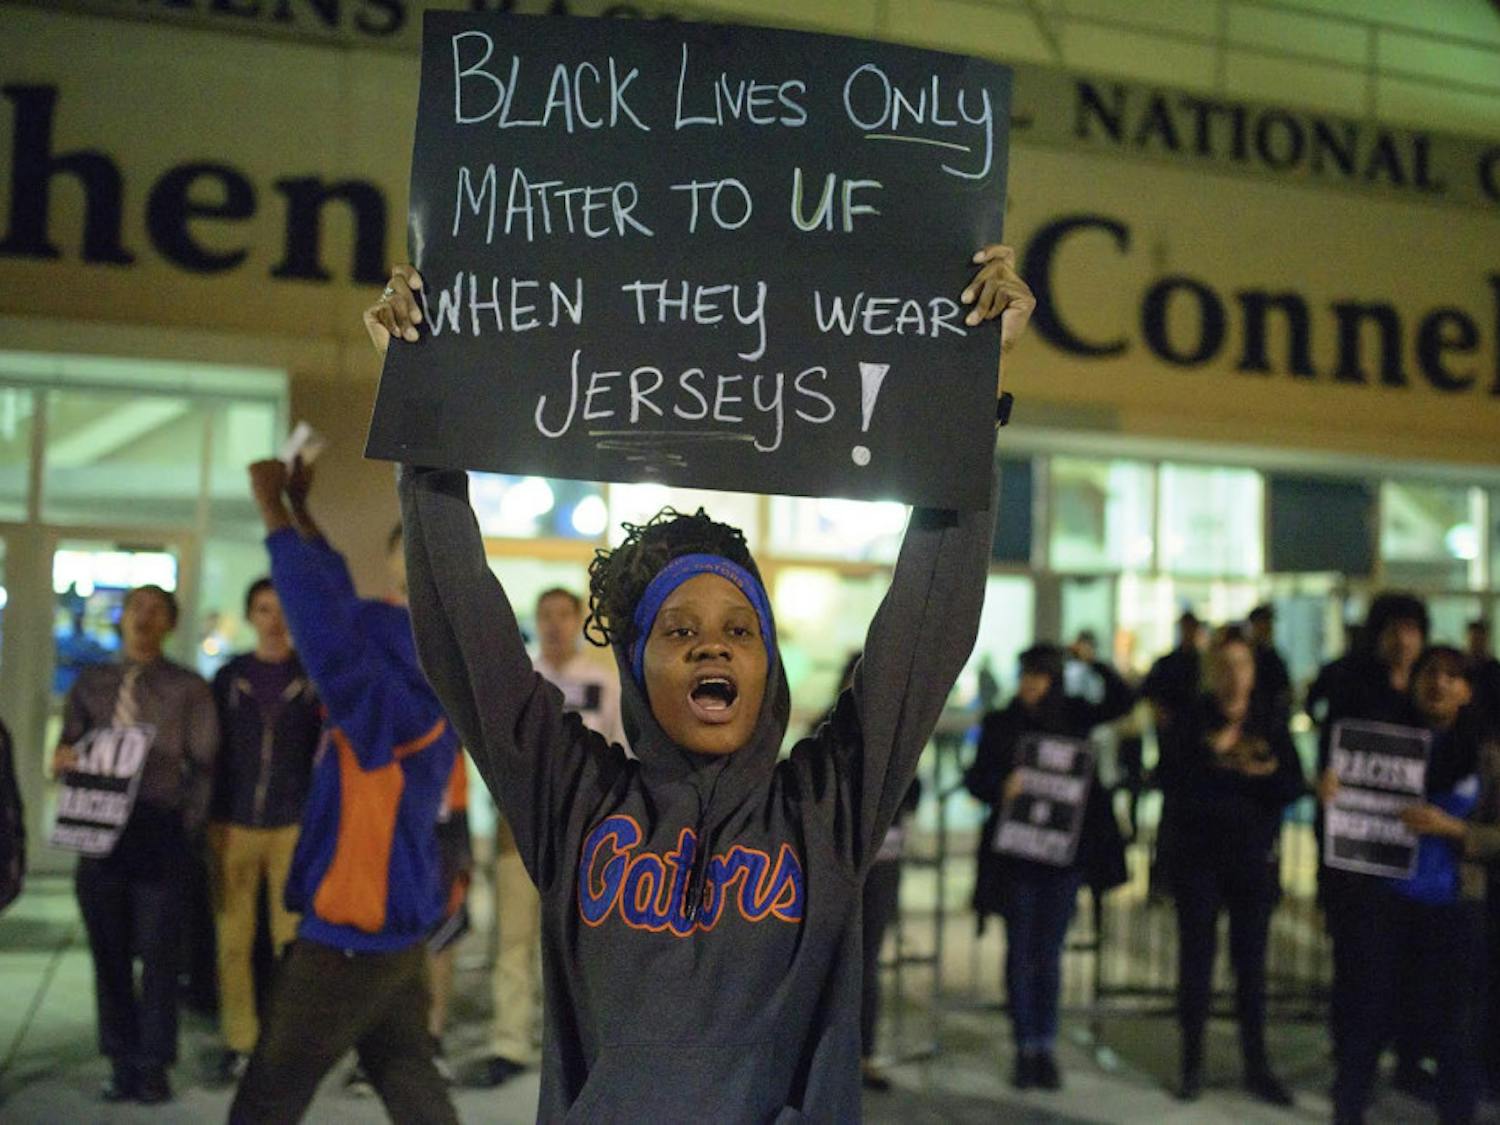 A protester outside the Stephen C. O’Connell center holds a sign with a statement implying the University of Florida is only concerned with African-Americans that participate in athletics at the school.